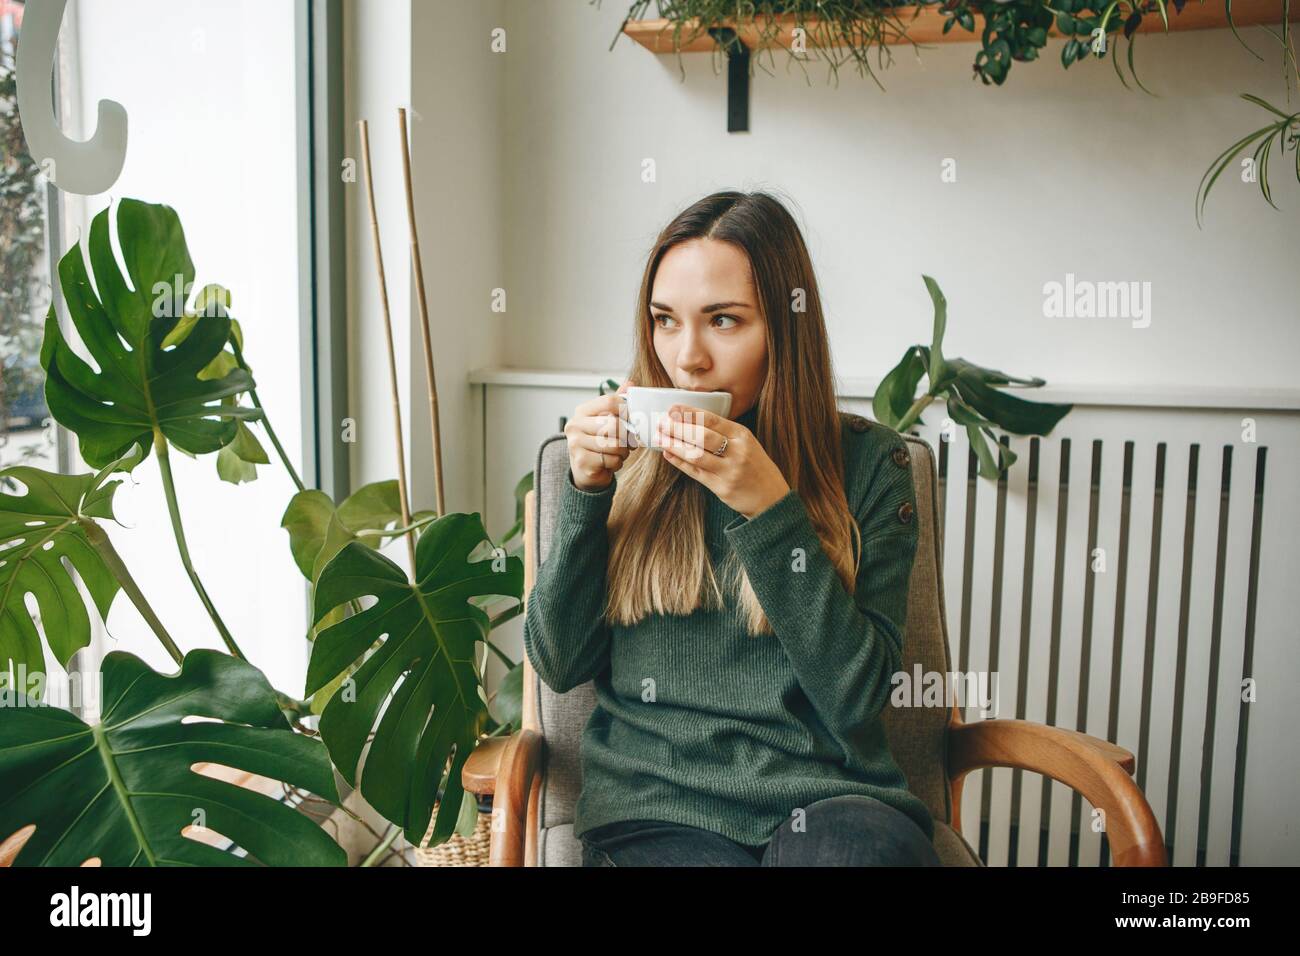 A girl sits in a cafe and drinks a hot drink. She is waiting for someone and she has a meeting or enjoys her morning drink. Stock Photo